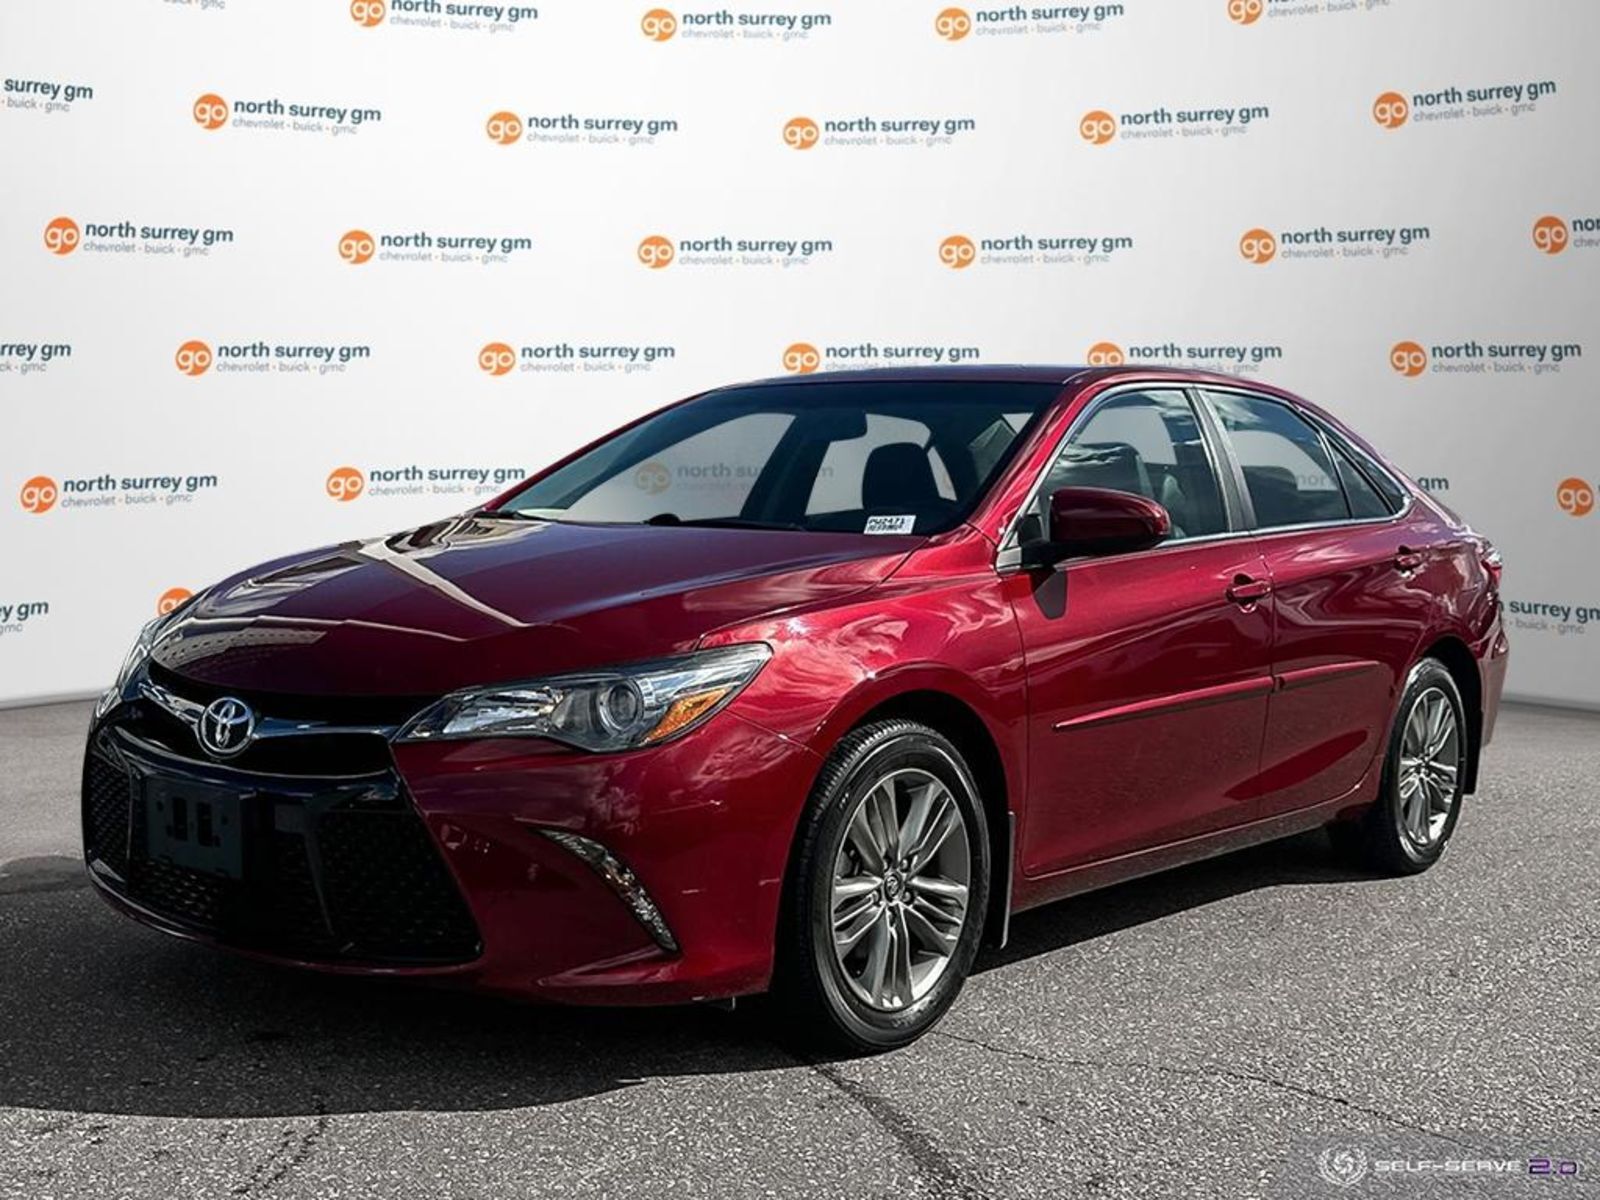 2015 Toyota Camry SE - Low Kms / Rear View Cam / Cruise Control / No